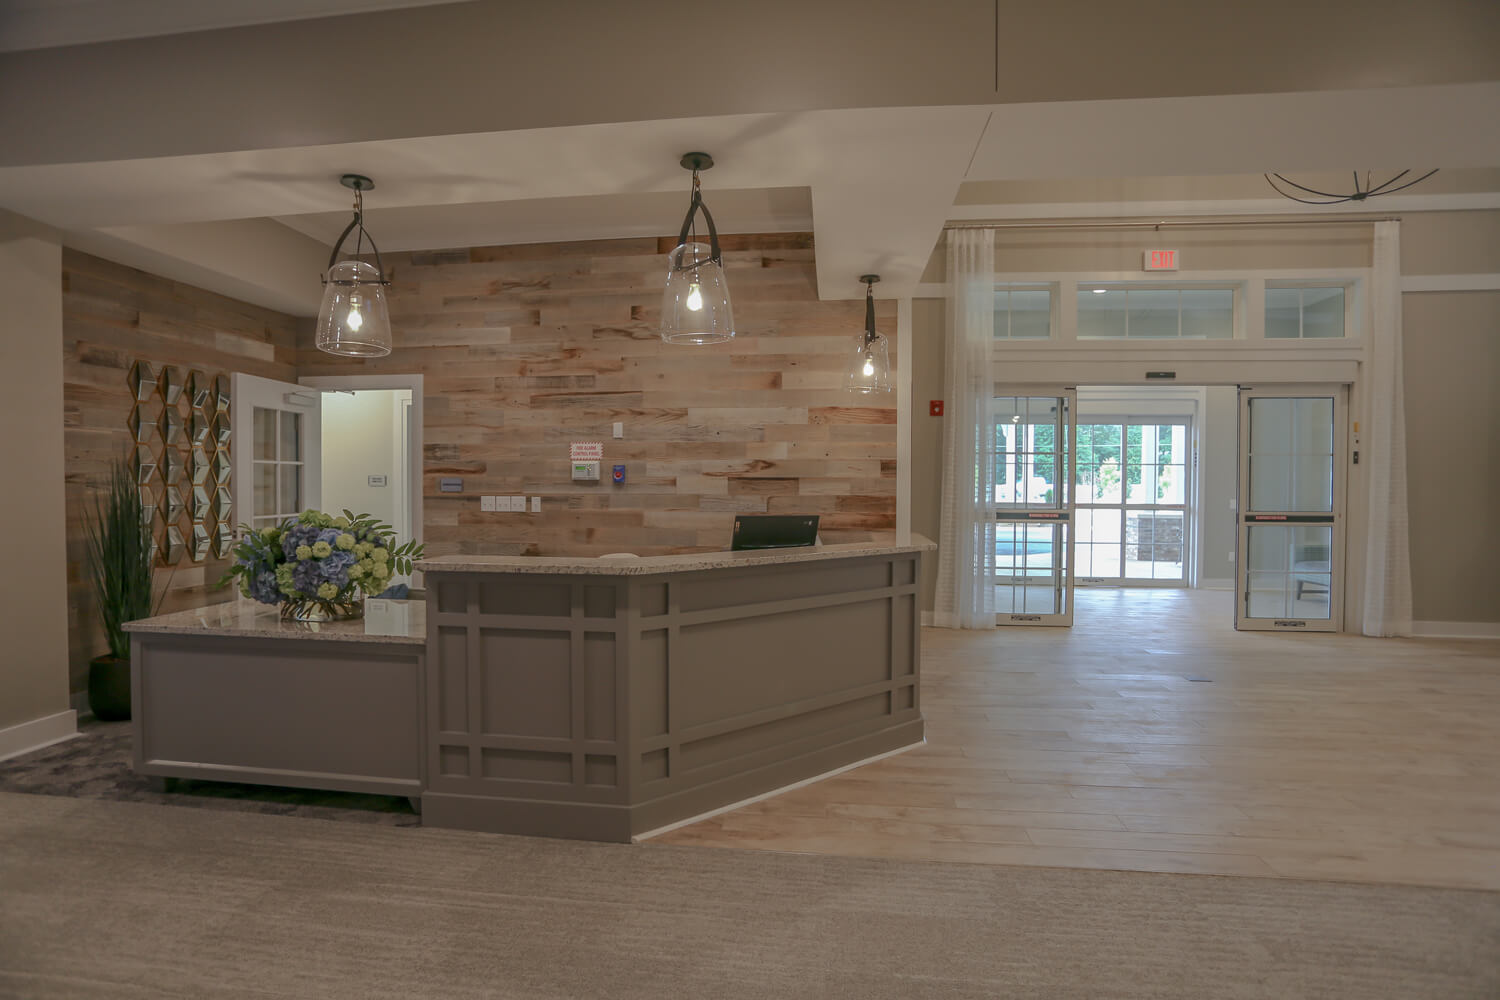 Grand South Senior Living - Front Entry - Designed by Foshee Architecture